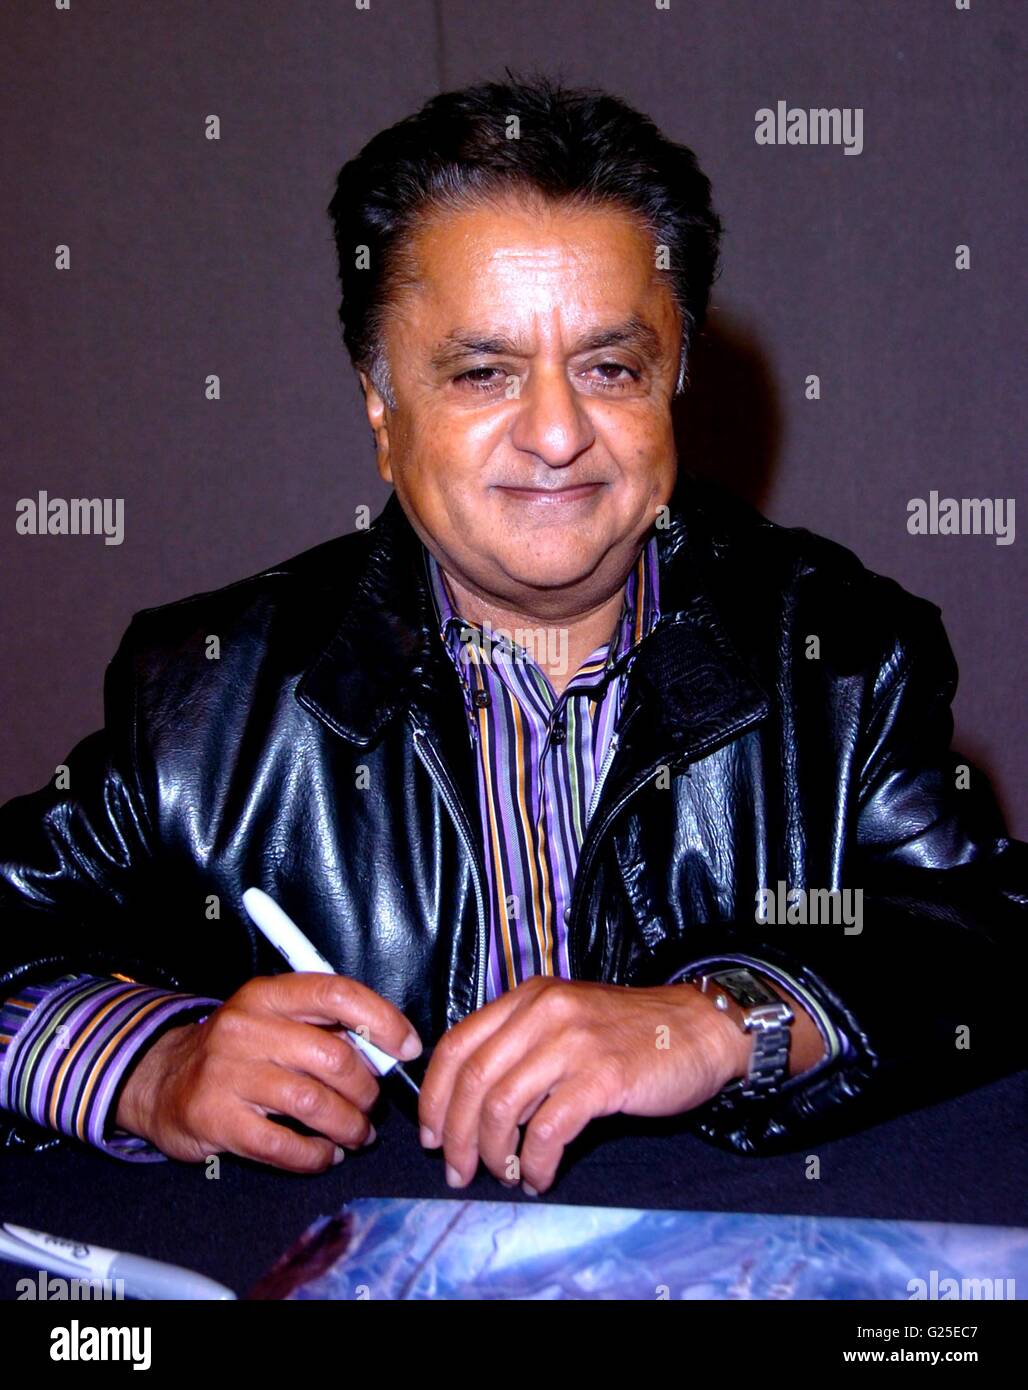 deep roy commercial